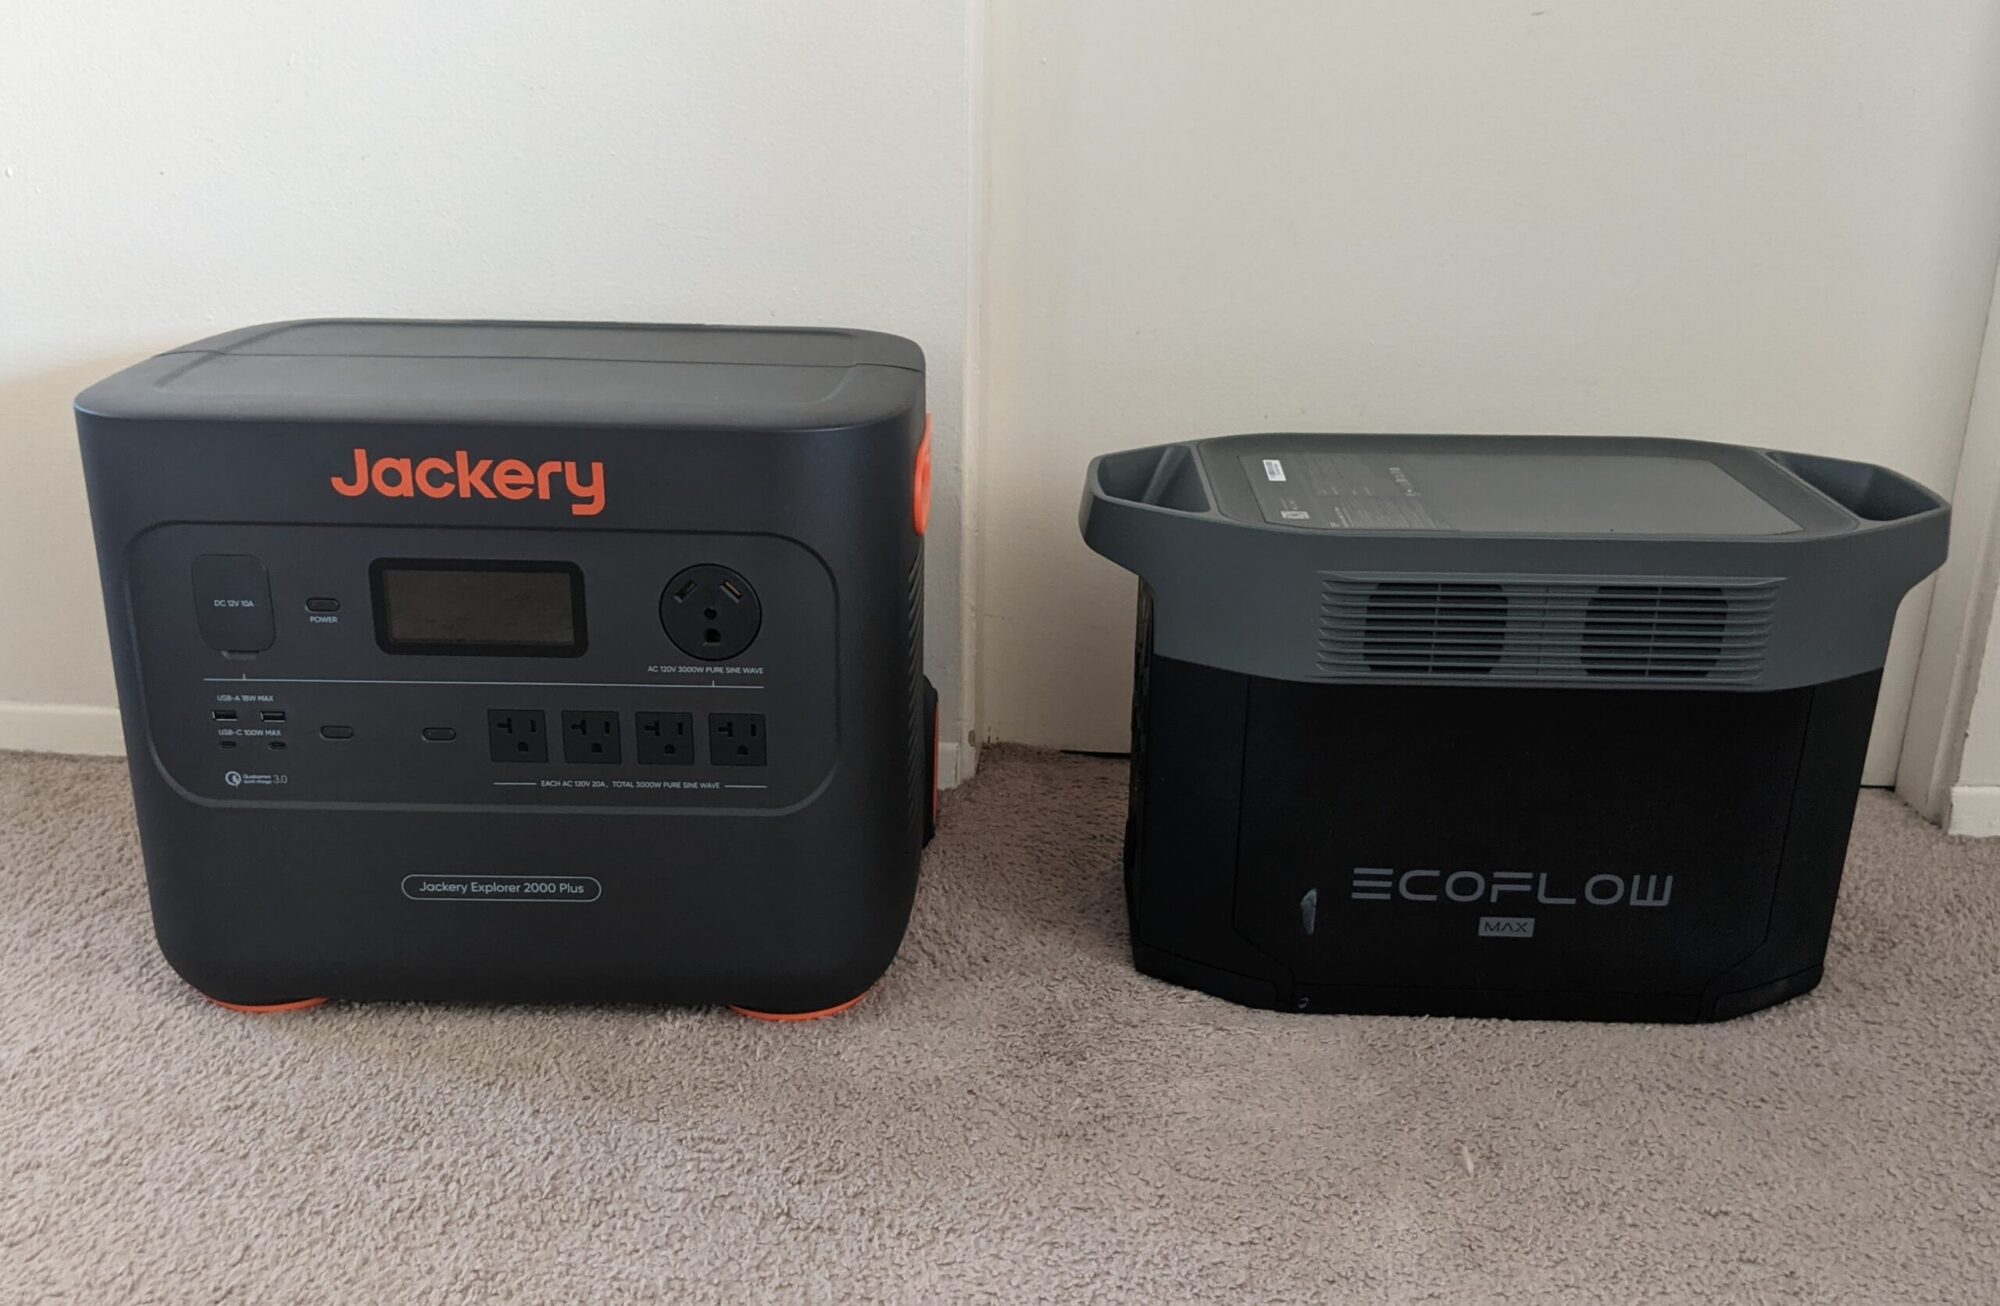 The Jackery 2000 sits next to the Eco Flow.